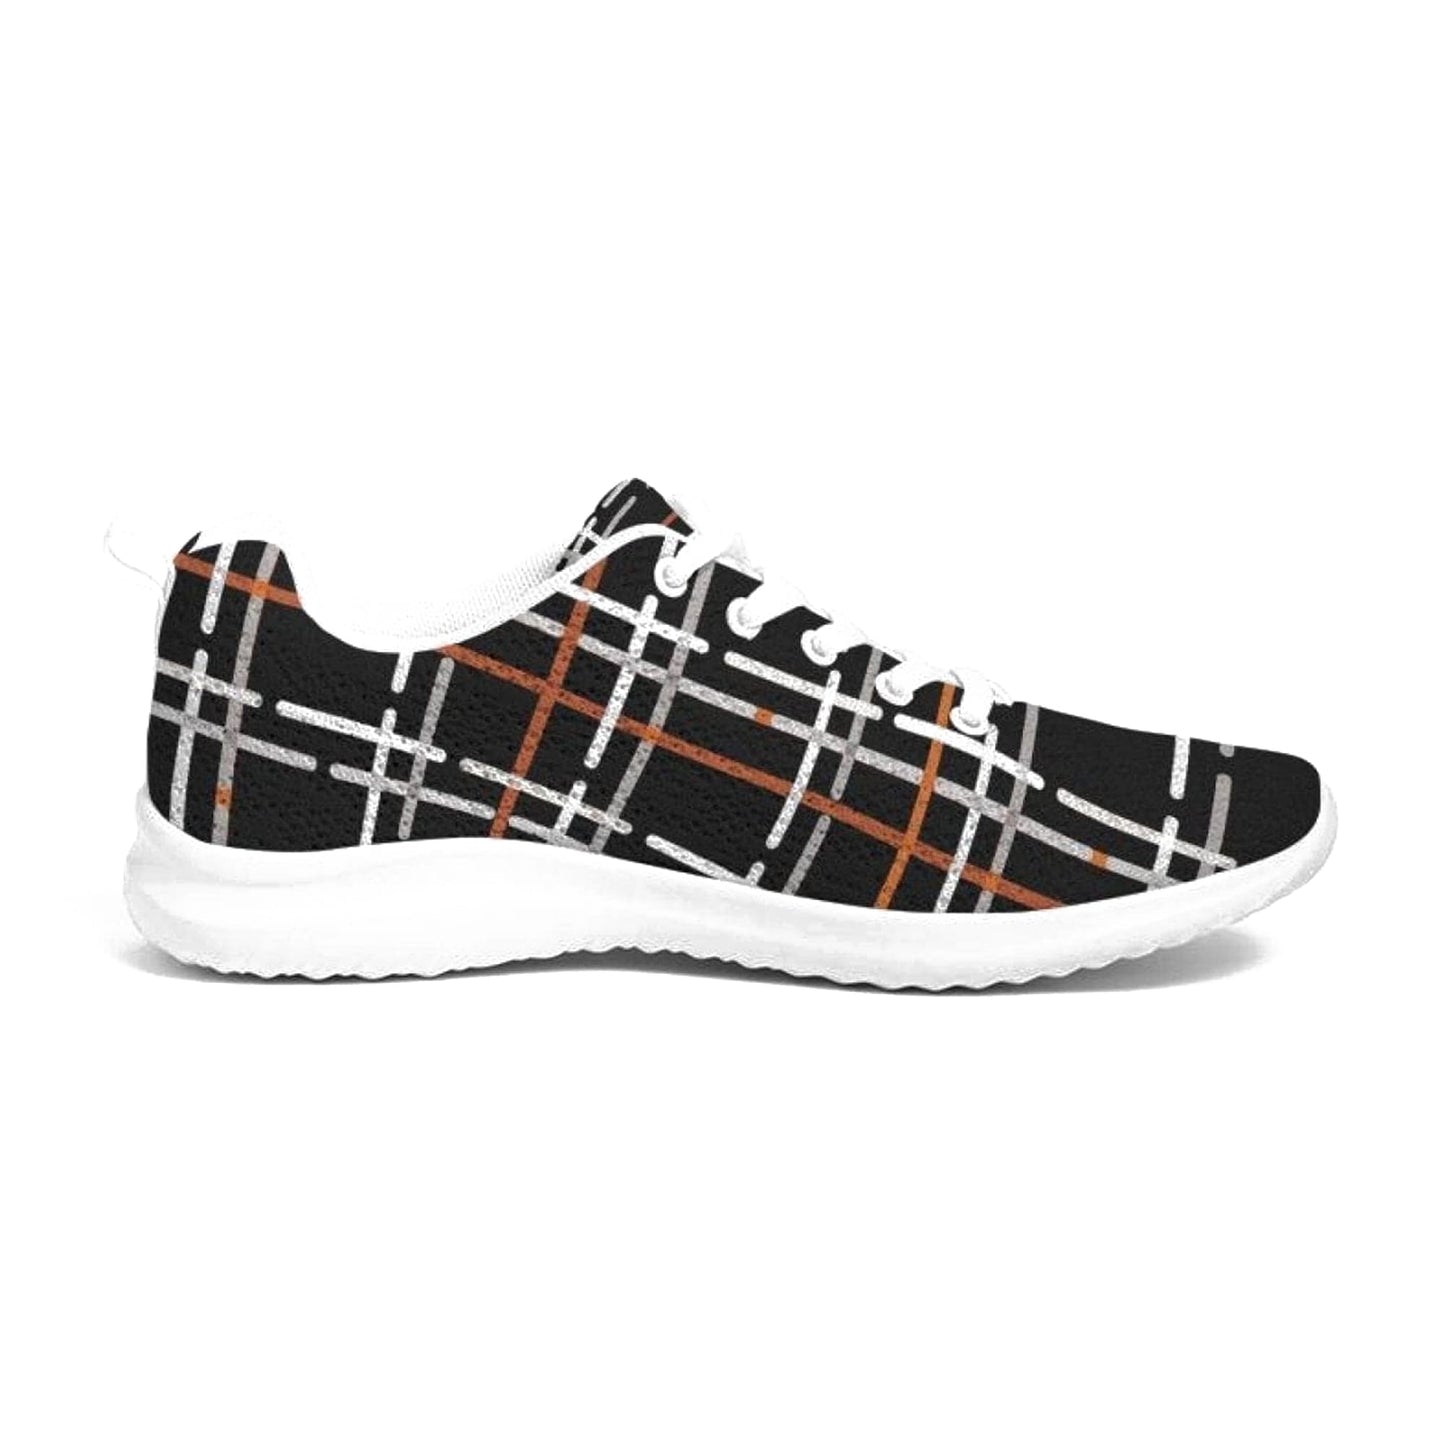 Womens Sneakers - Canvas Running Shoes, Black Plaid Print - Scarvesnthangs